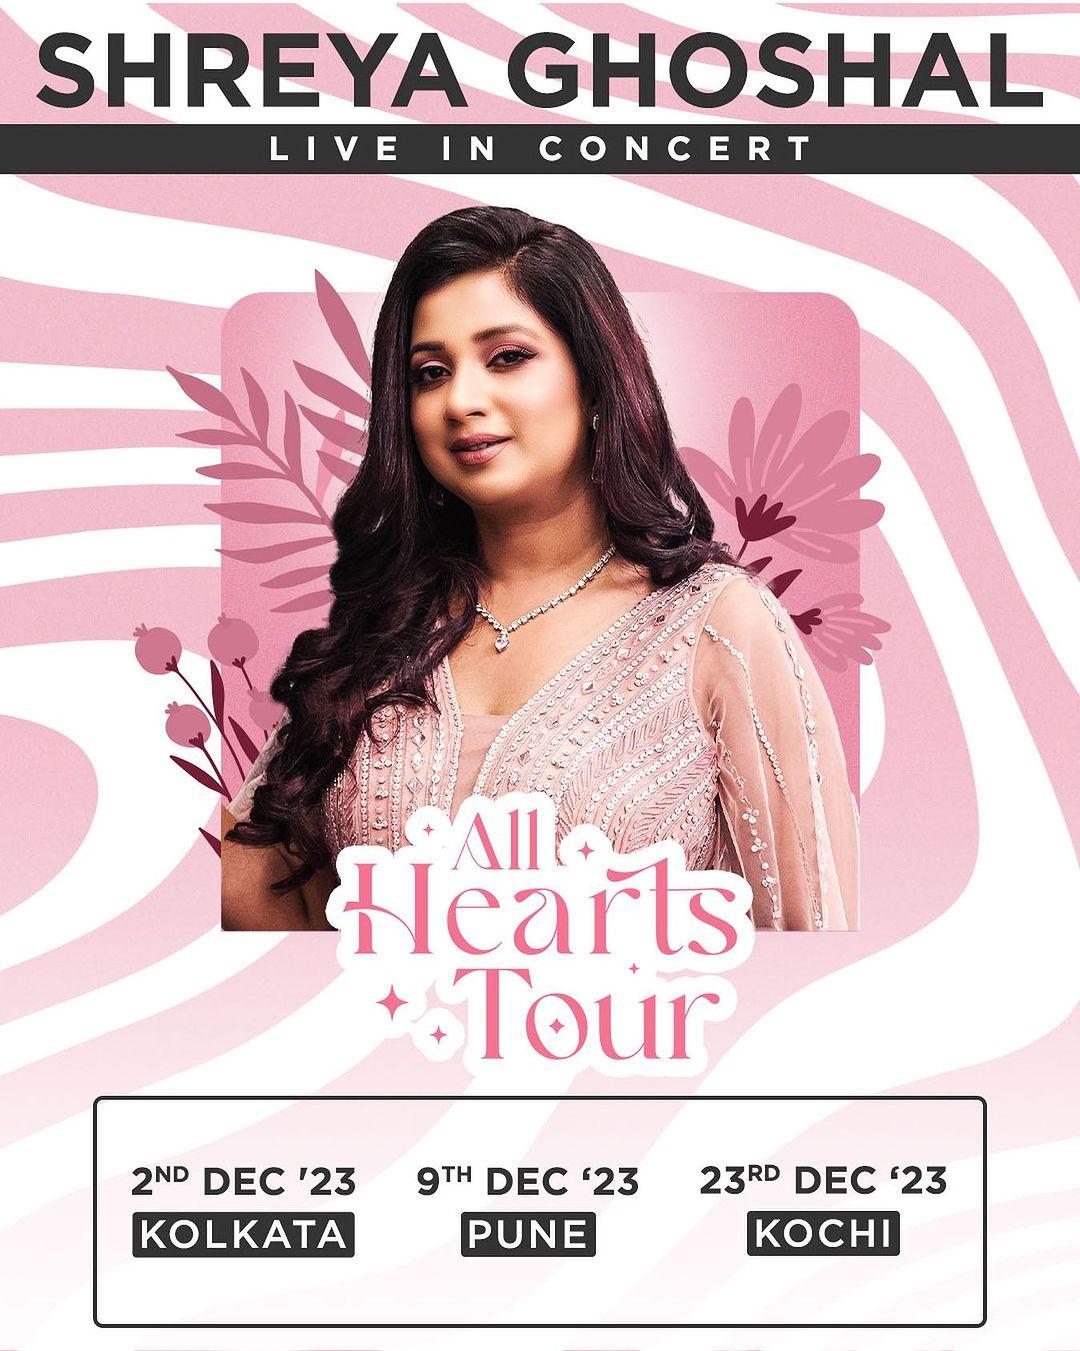 Kolkata, Pune and Kochi are you ready?! Bringing my All Hearts Tour to your cities this December! Get your tickets soon! Can’t wait to sing my heart out for you all 🩷🎶🎤 #AllHeartsTour